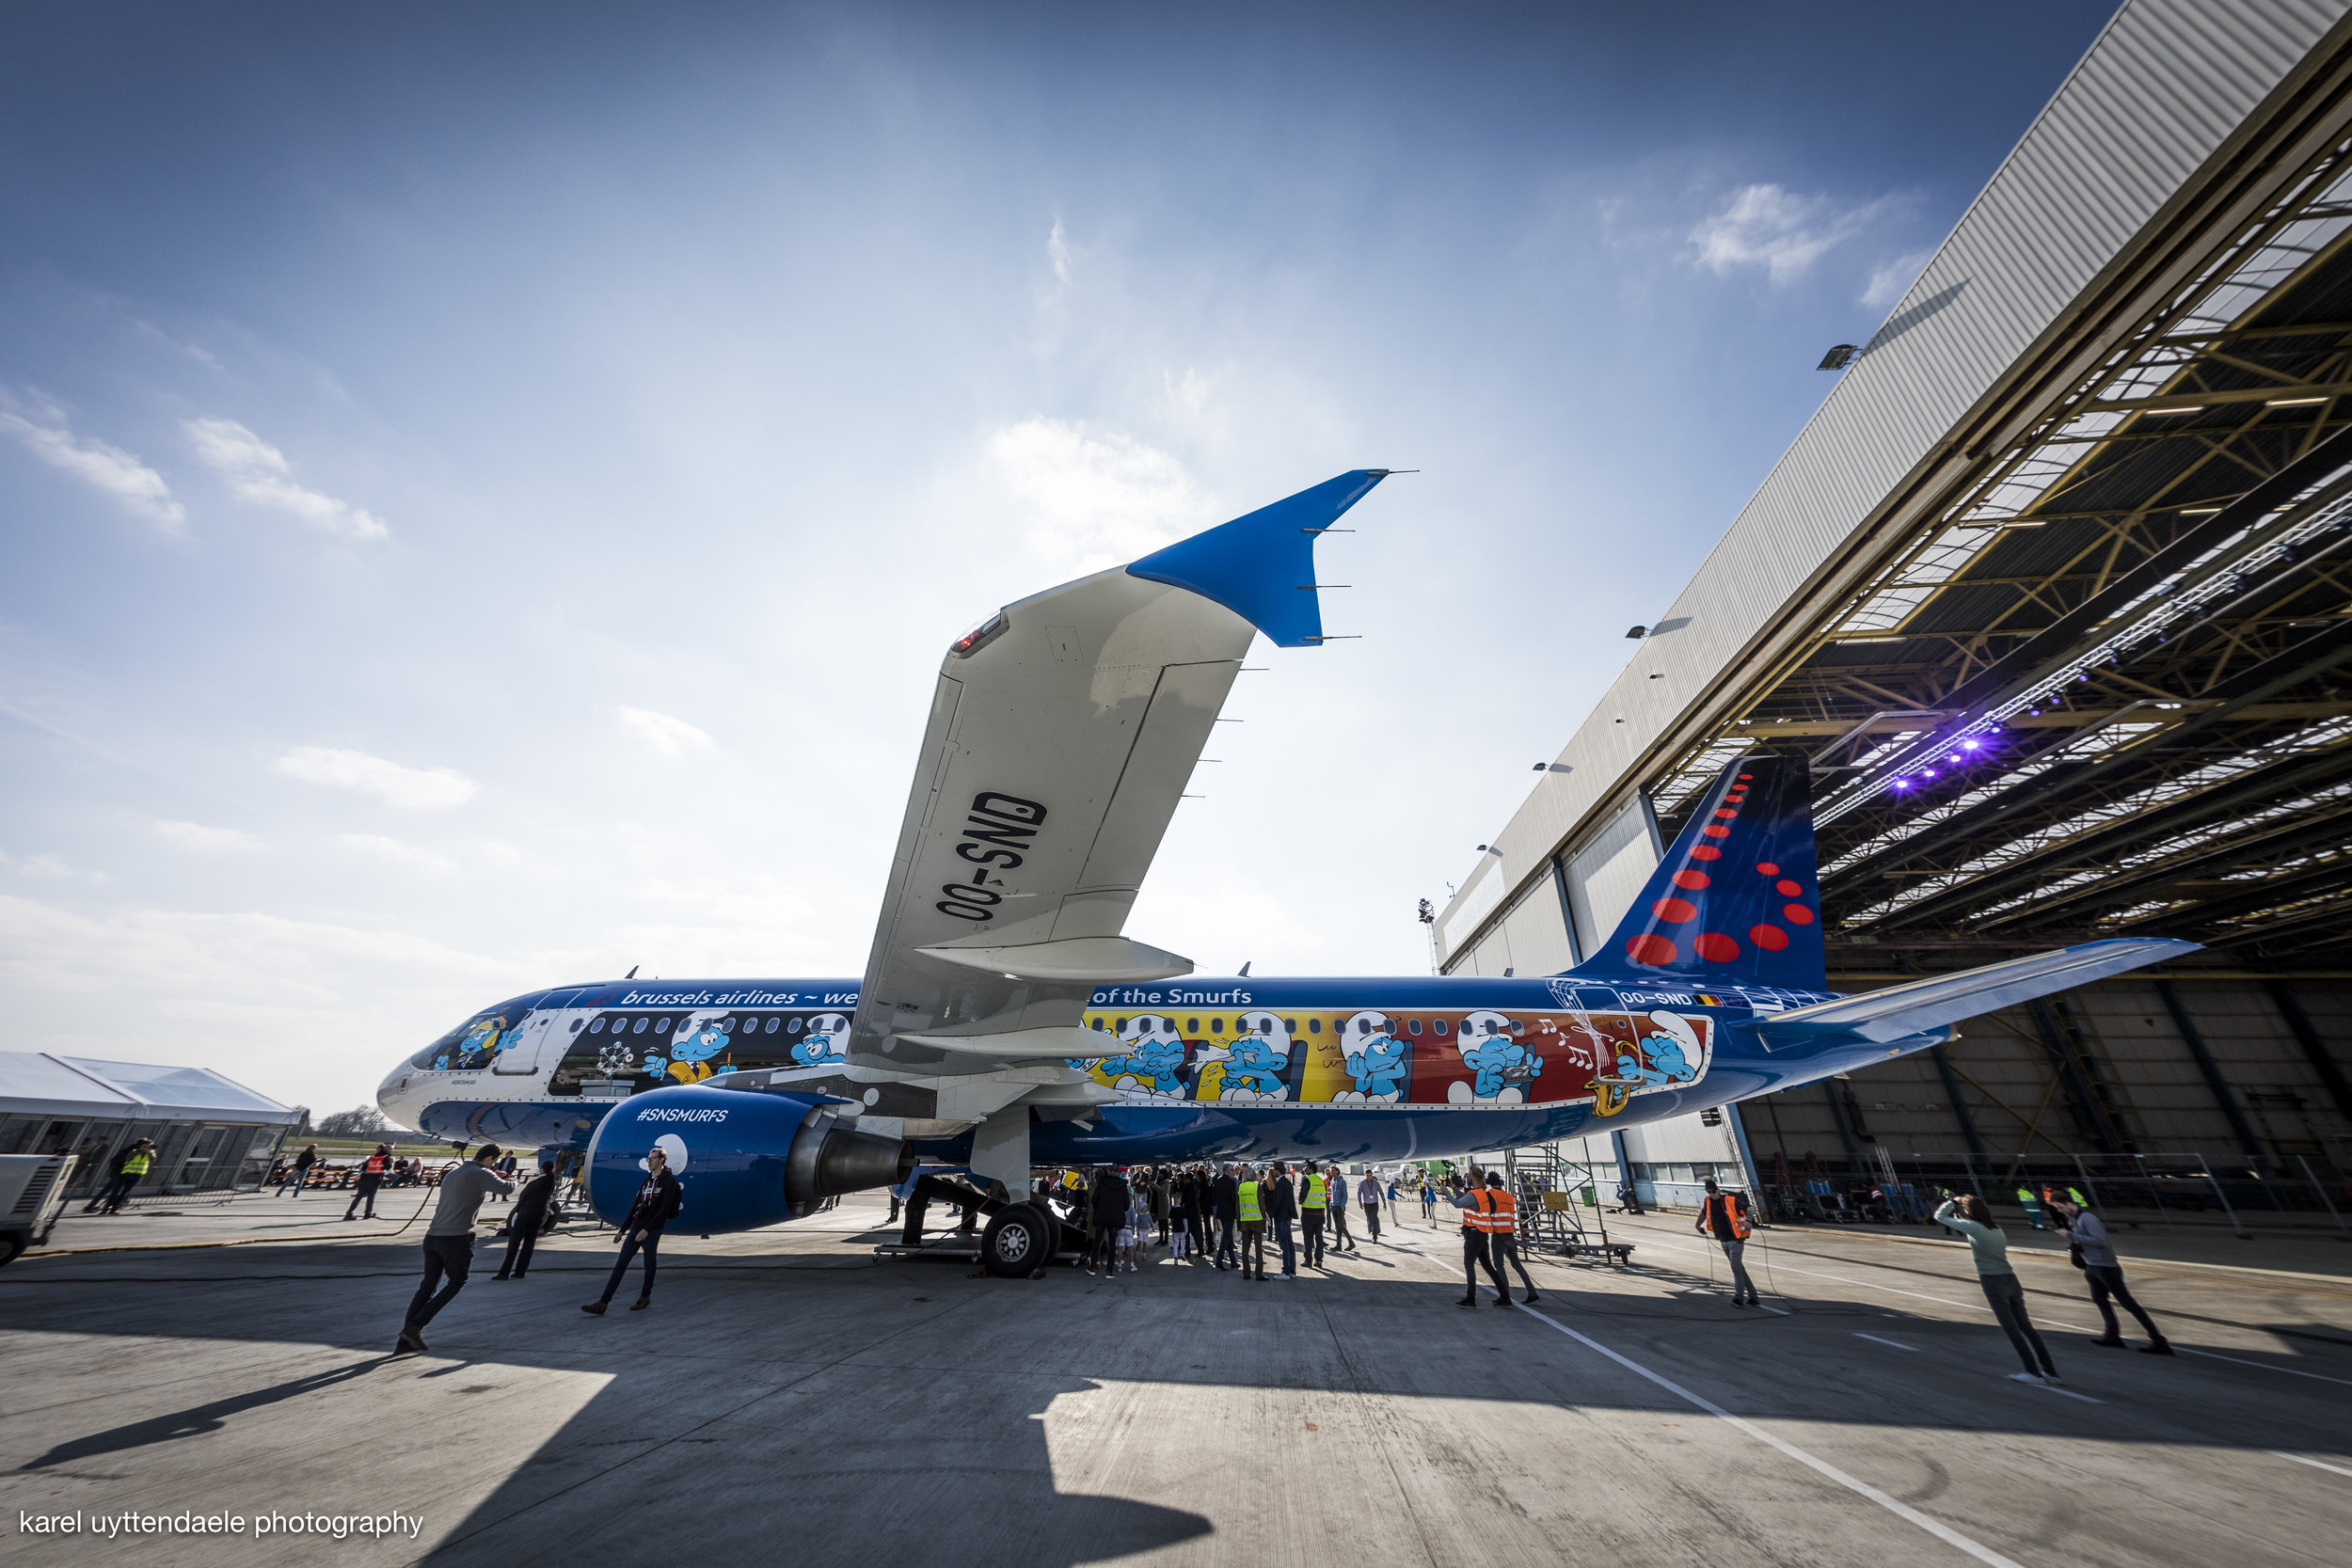 Introduction Brussels Airlines Aerosmurf #SNSmurfs